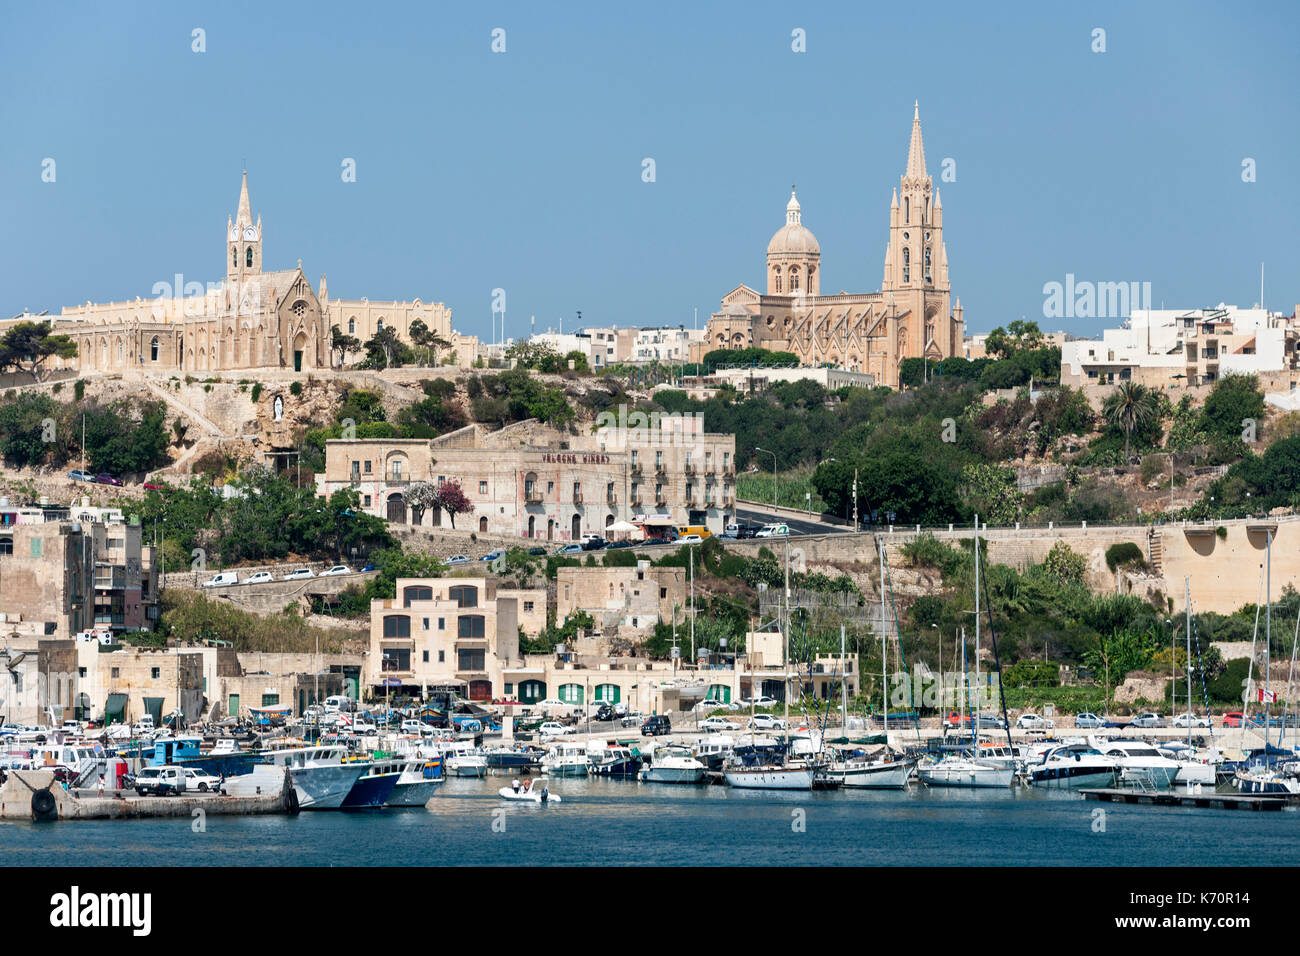 Mġarr town and harbour on the island of Gozo in Malta. Stock Photo